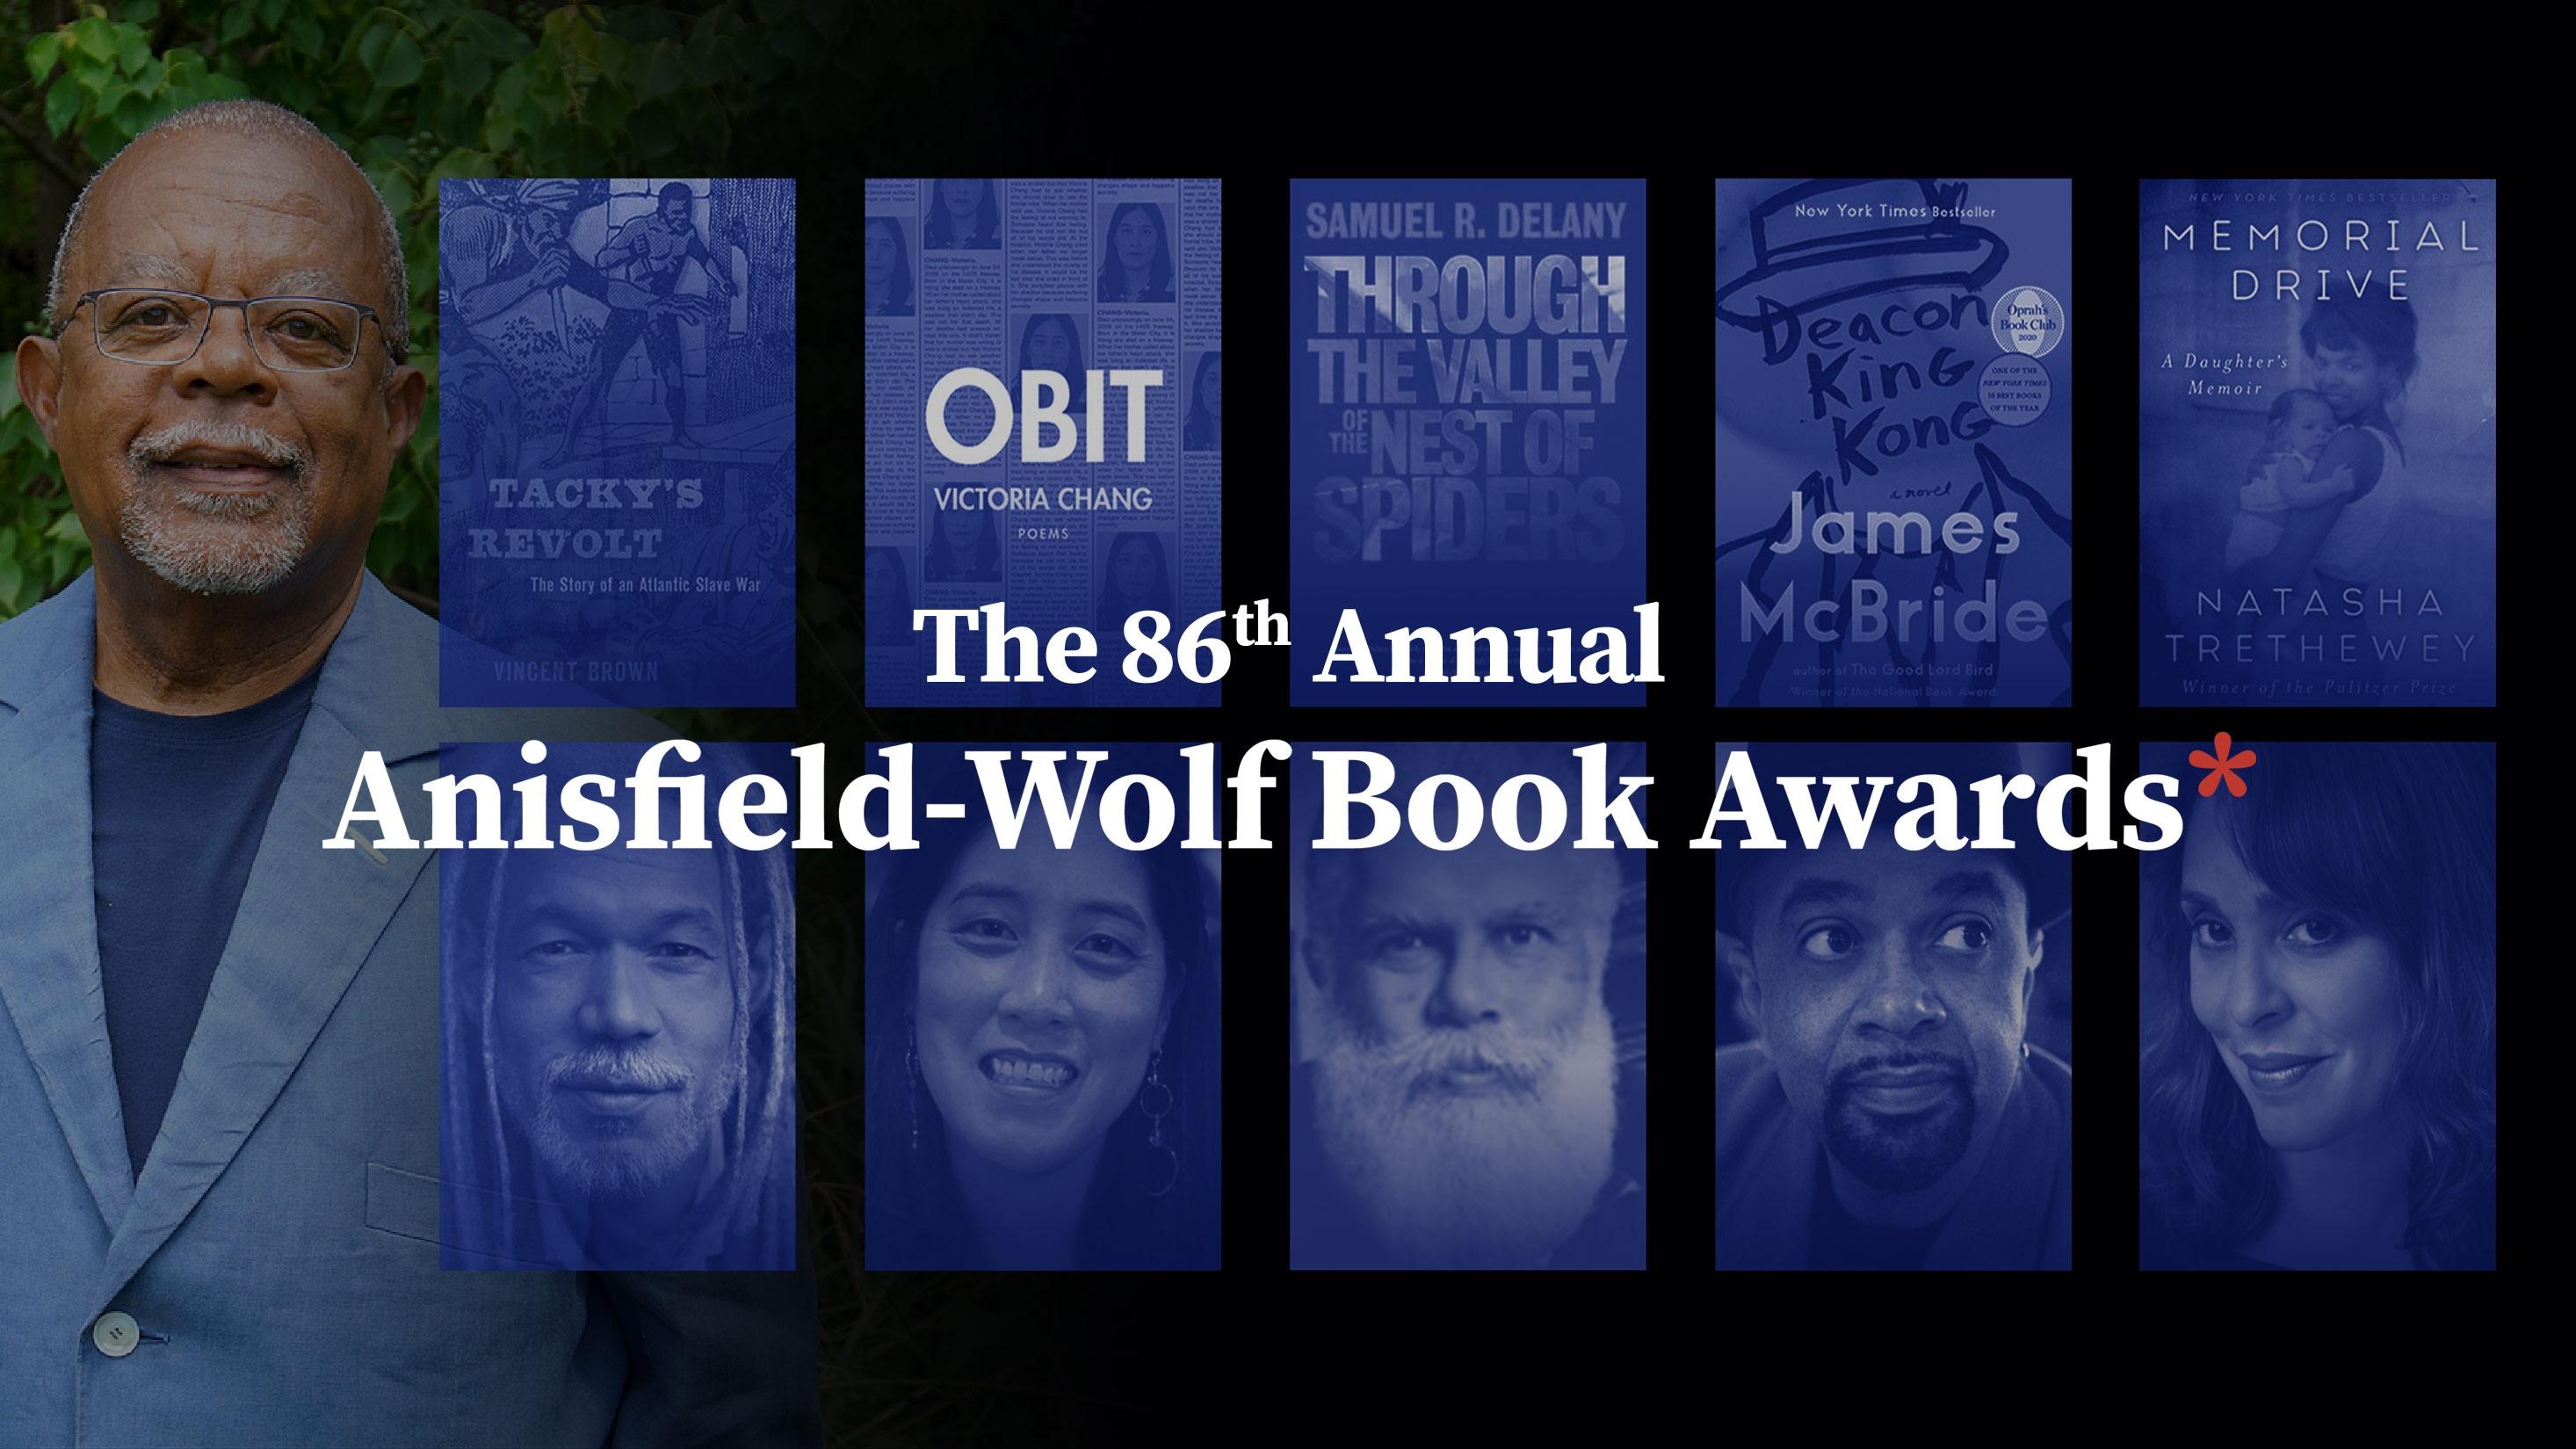 The 86th Annual Anisfield-Wolf Book Awards